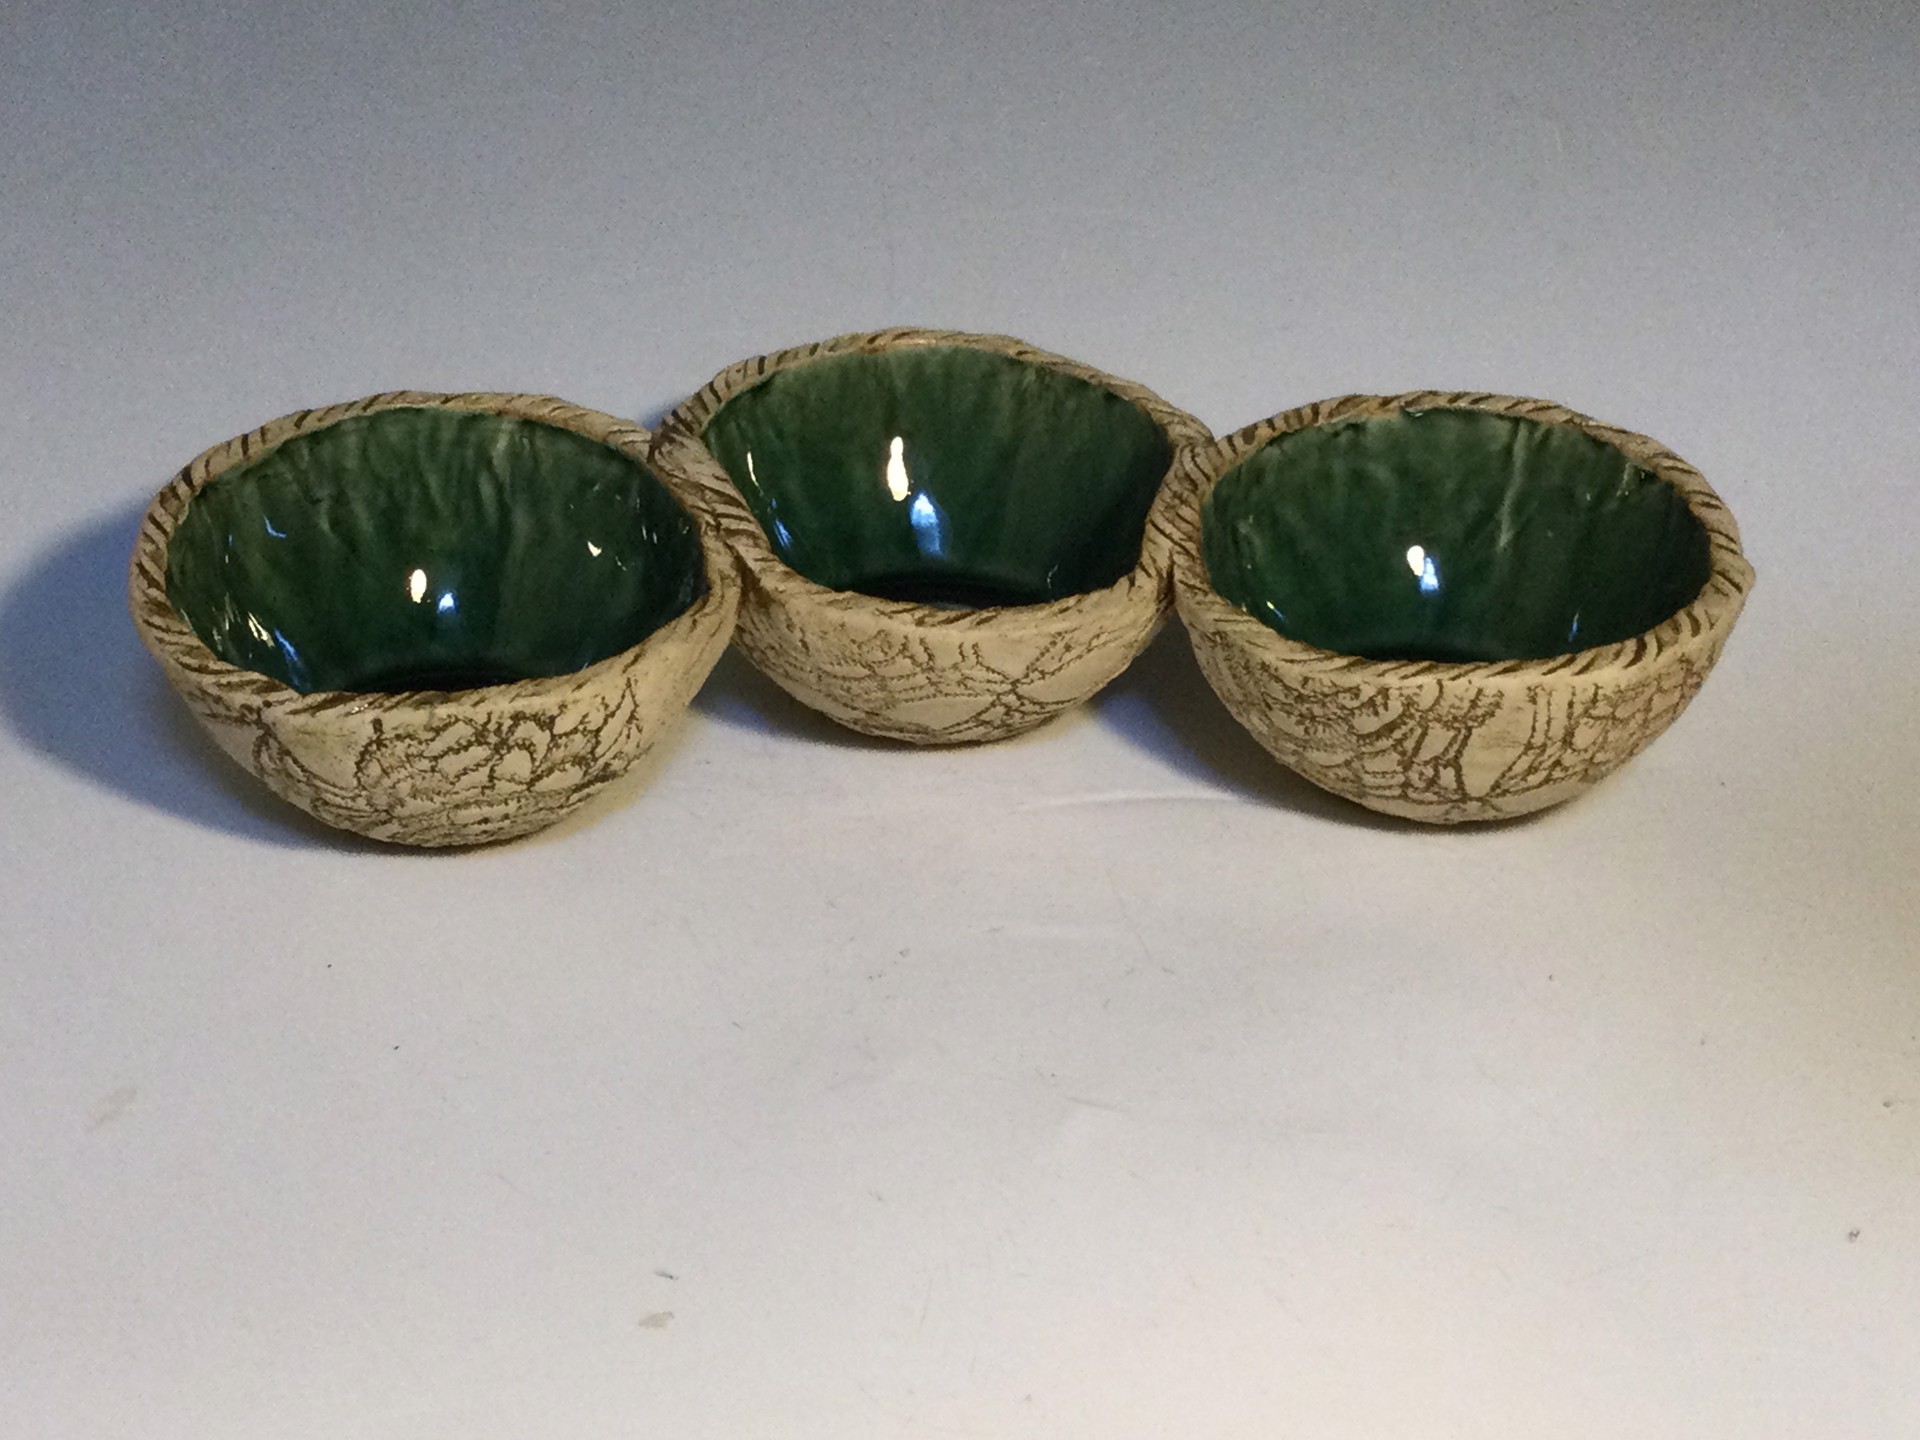 Condiment Bowls by Anna M. Elrod